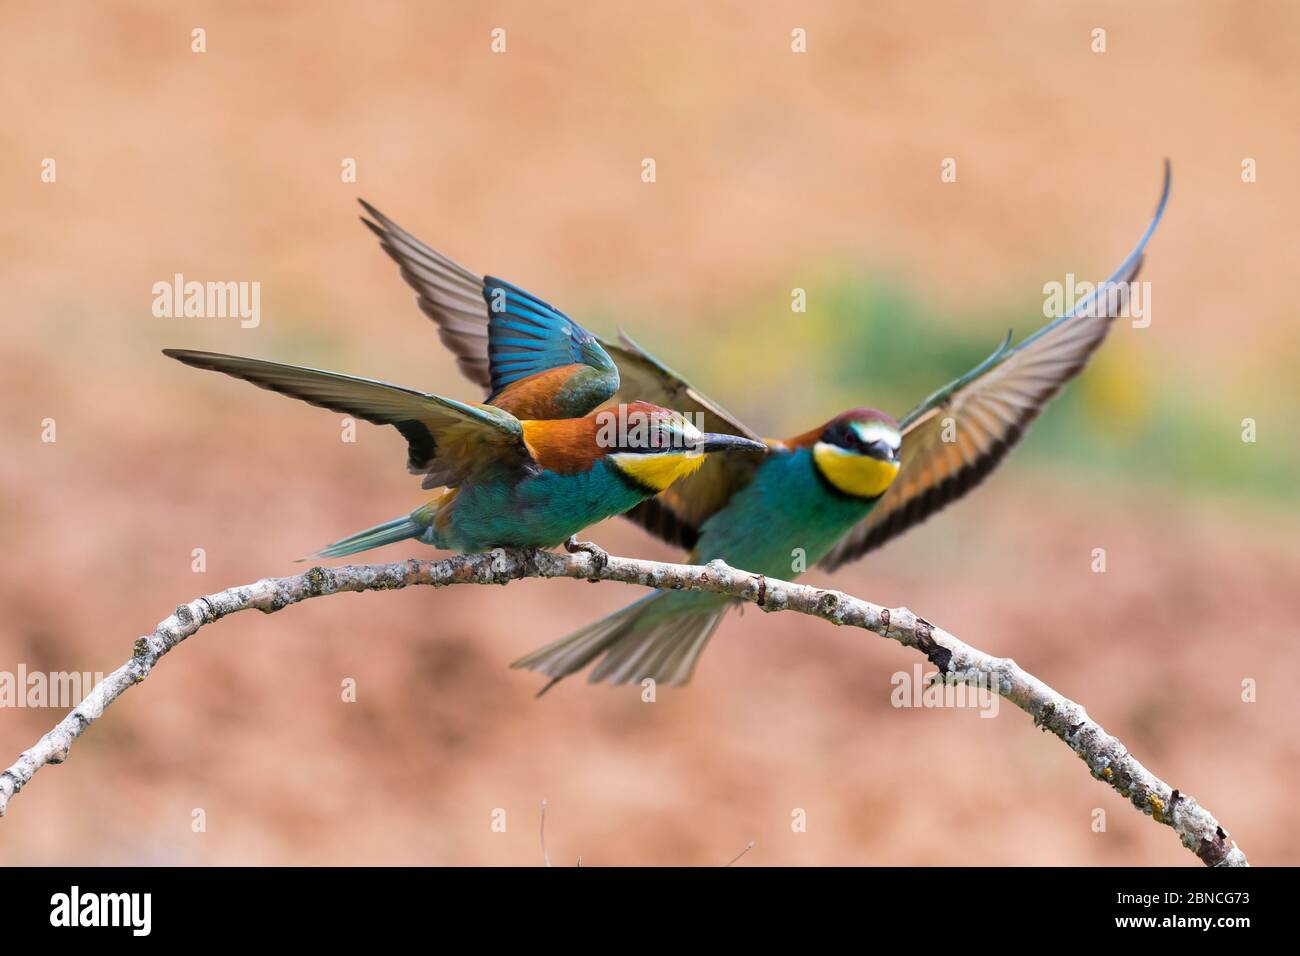 European Bee-eater, Merops apiaster, two individuals perched on a branch with open wings on a blurred background. Spain Stock Photo